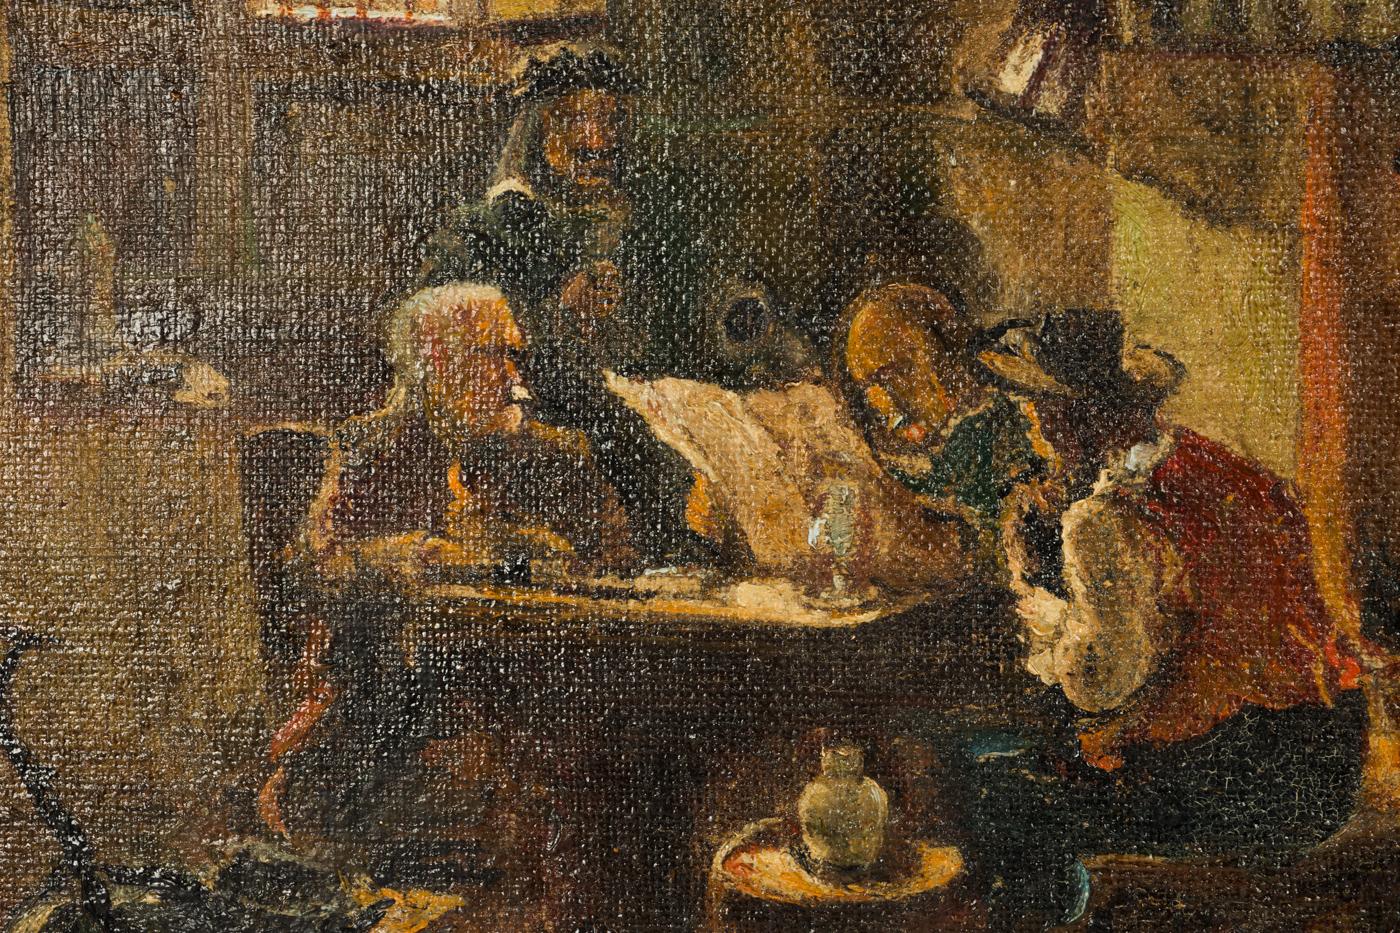 Painting, oil on canvas, 'In a Room'. Showing four men sitting at the table in a bourgeois interior, signed lower right, framed, size 28 x 23 cm, total size 44.5 x 38 cm, loose frame, partially slight abrasion of paint.